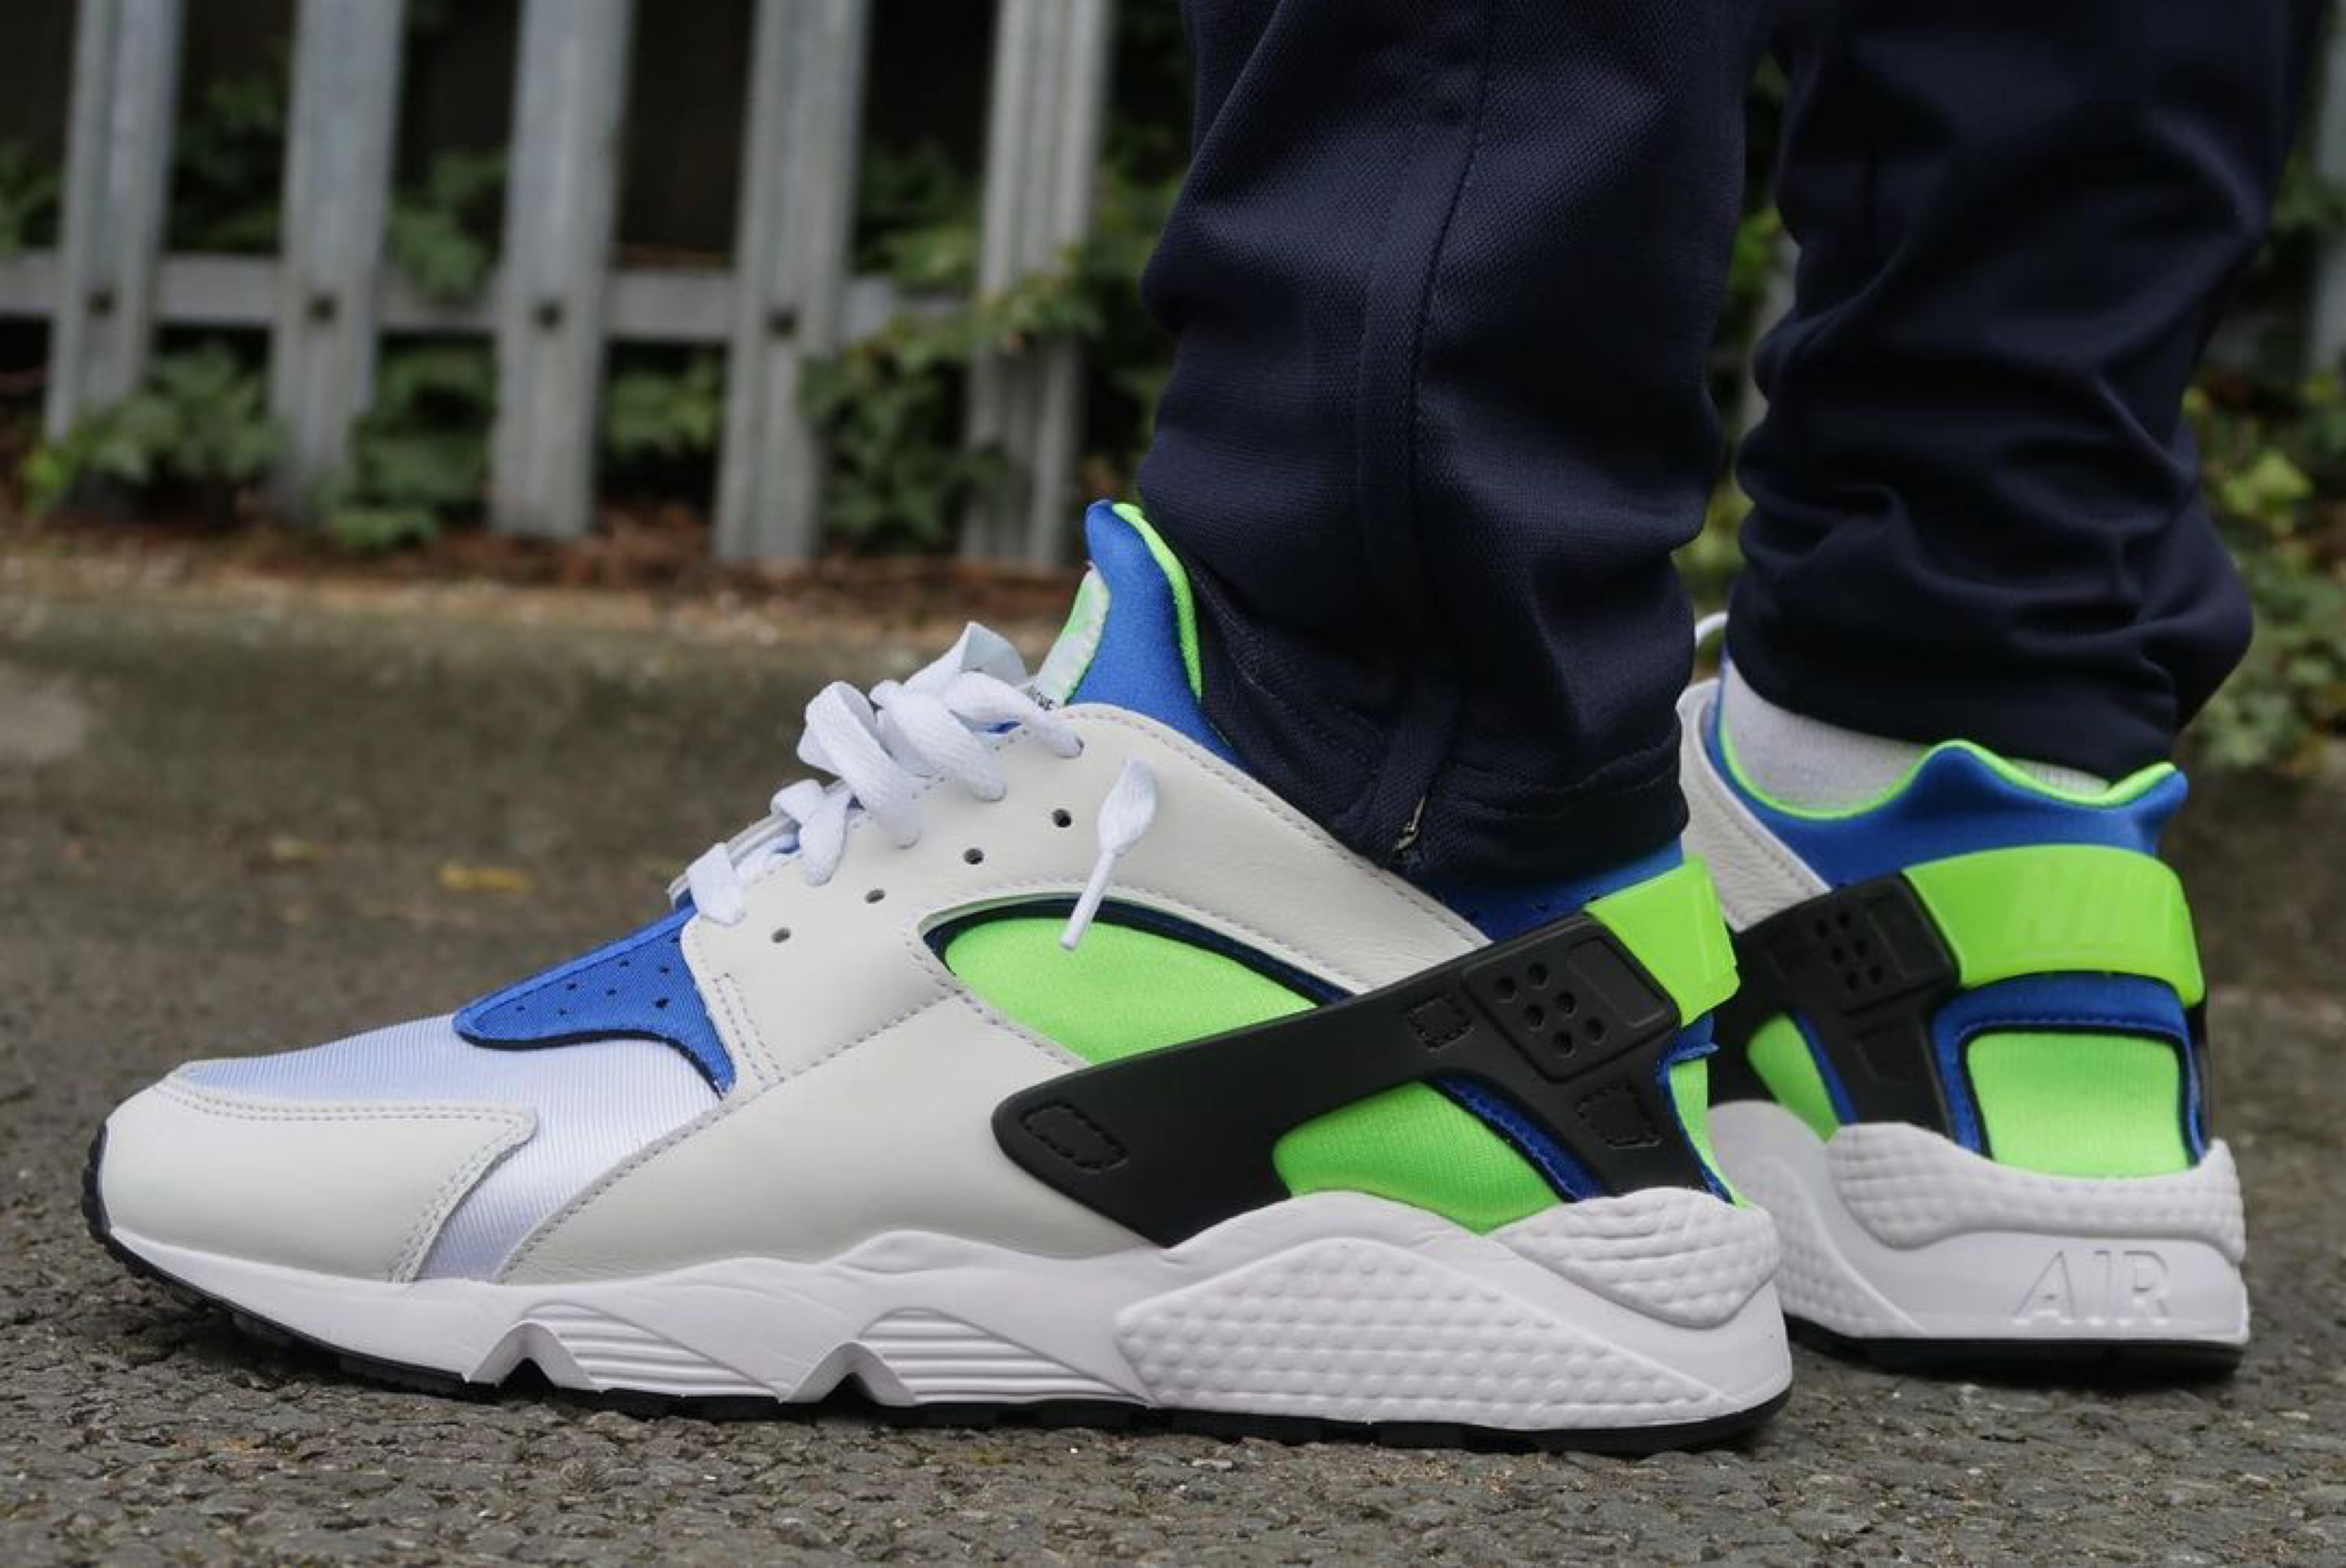 All You Need to Know About the Release of the Air Huarache Scream Green